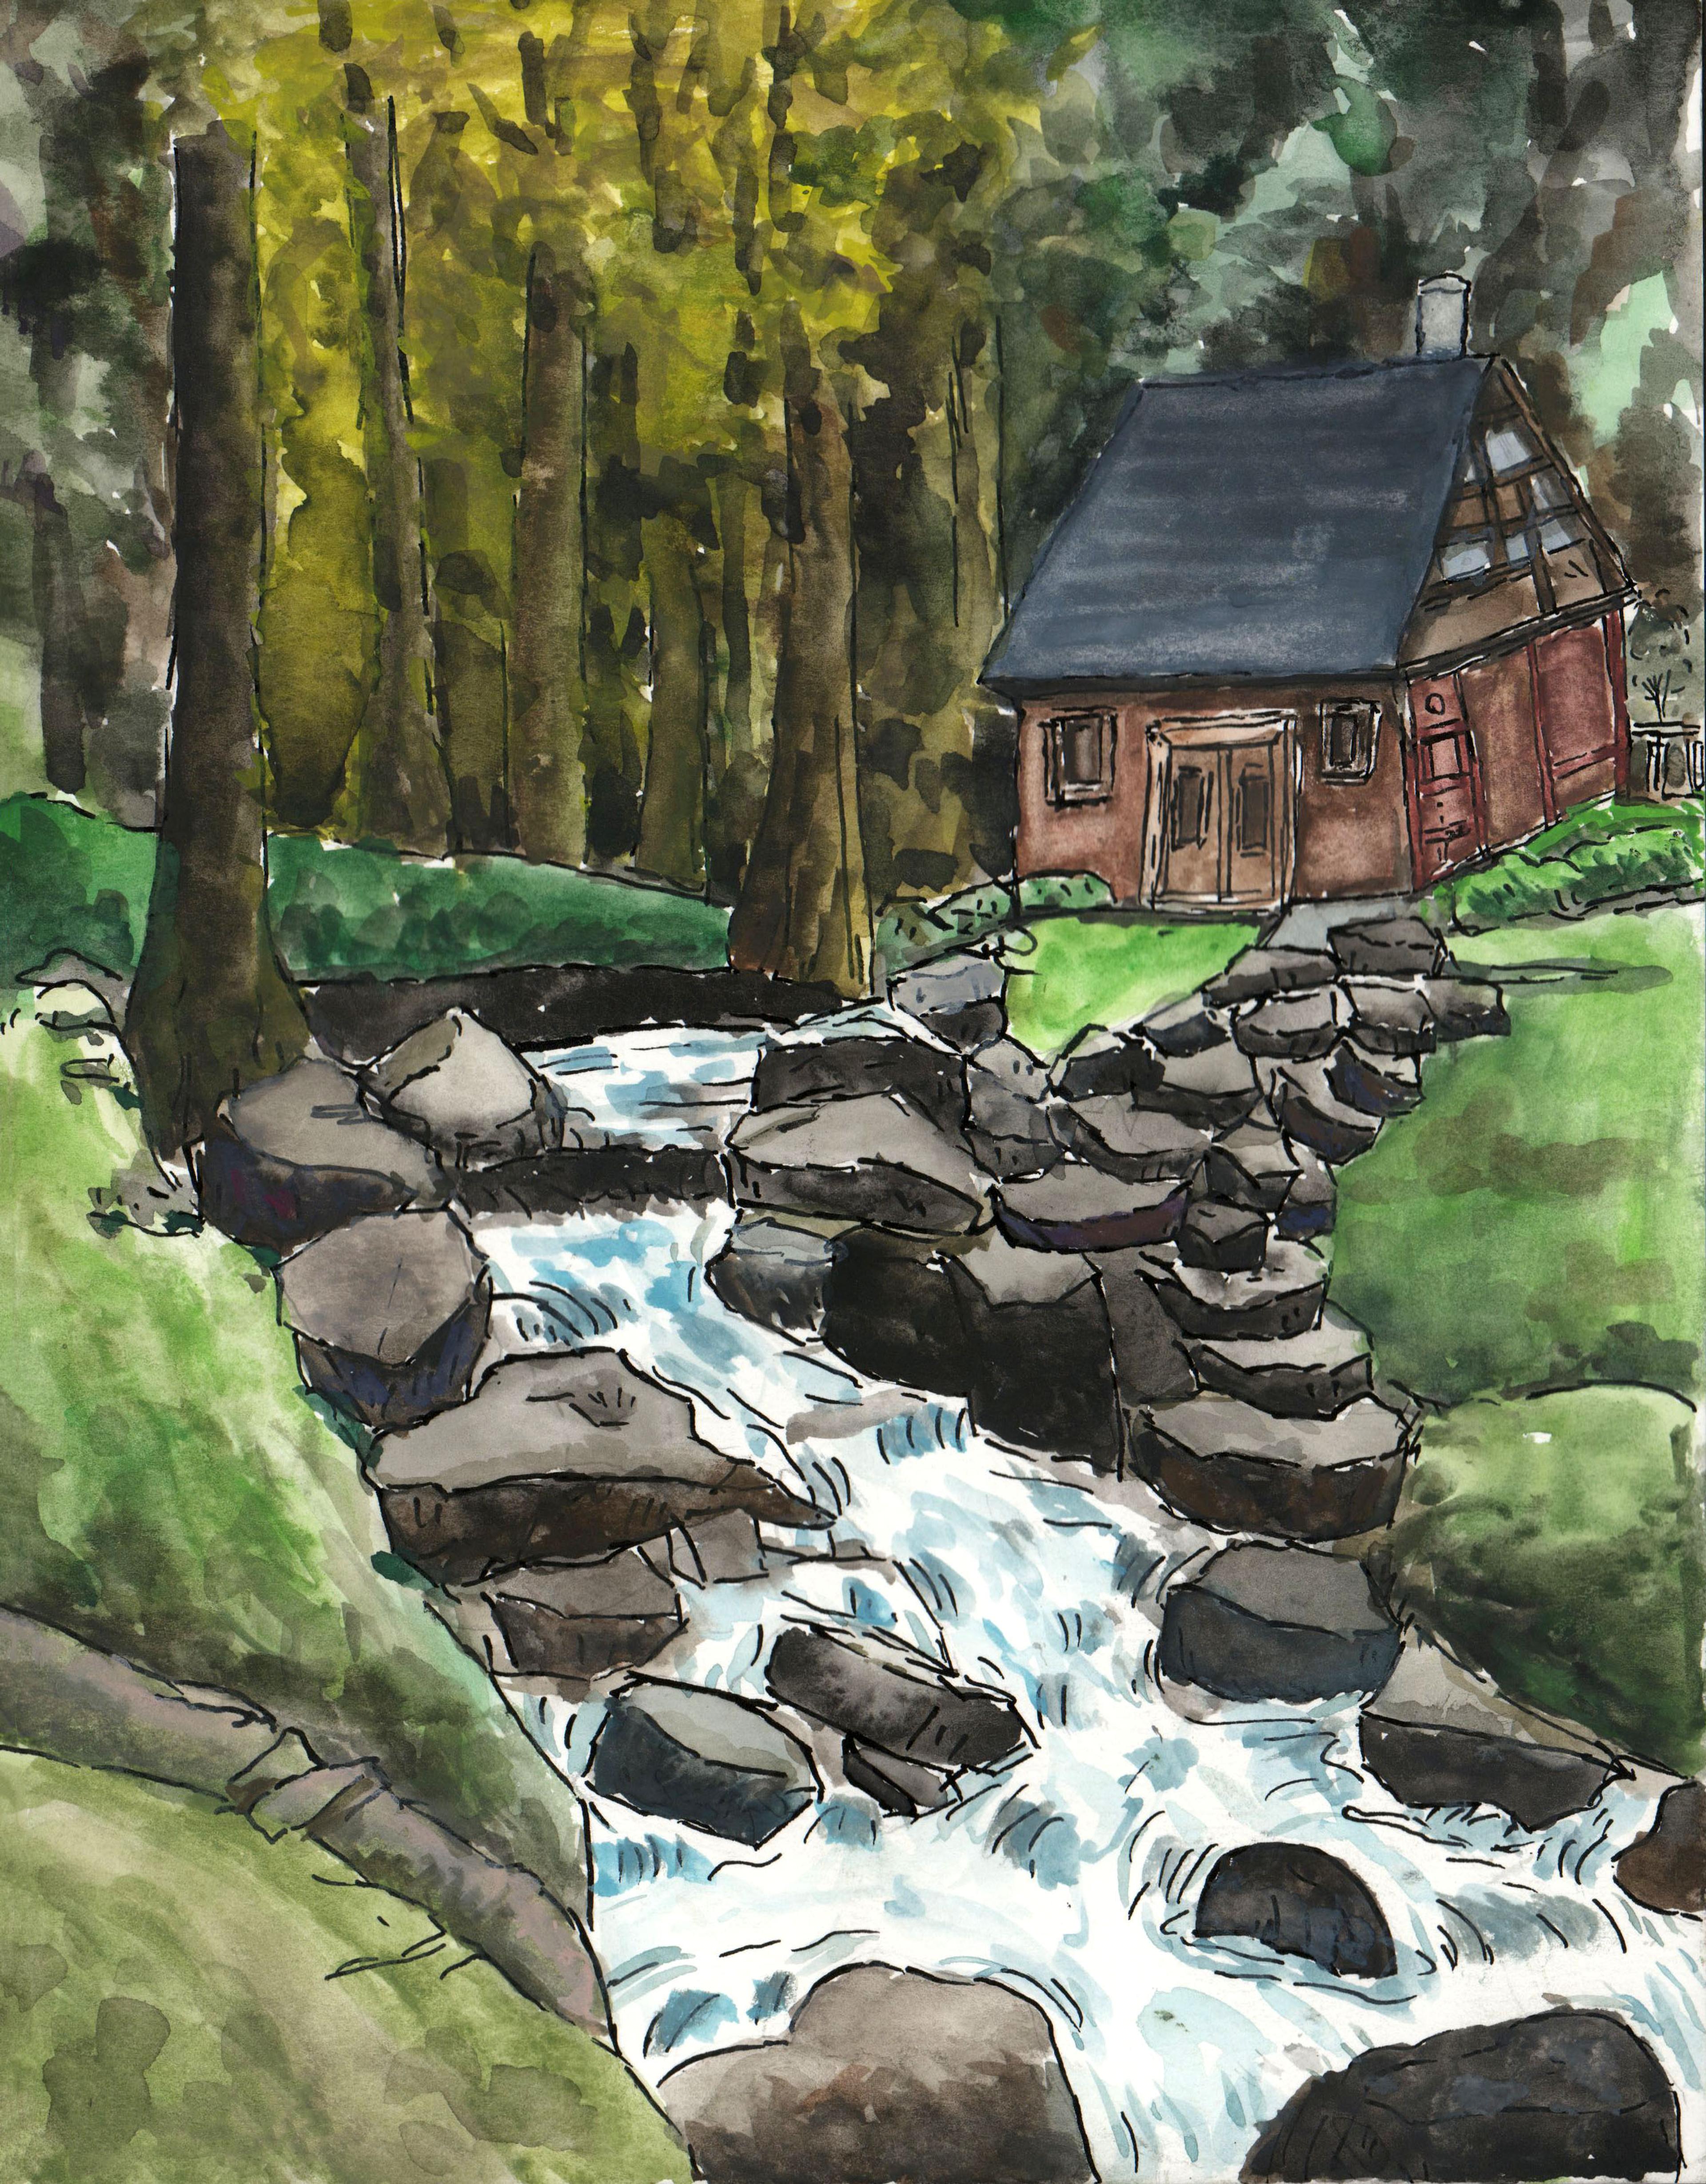 Watercolor-and-pen-and-ink illustration of a rock-strewn stream leading from the foreground to a wooden cabin in the background. The cabin sits on a green perch of grass in front of a canopy of tall trees. A long path of gray rocks leads from the edge of the water to the cabin in the distance.